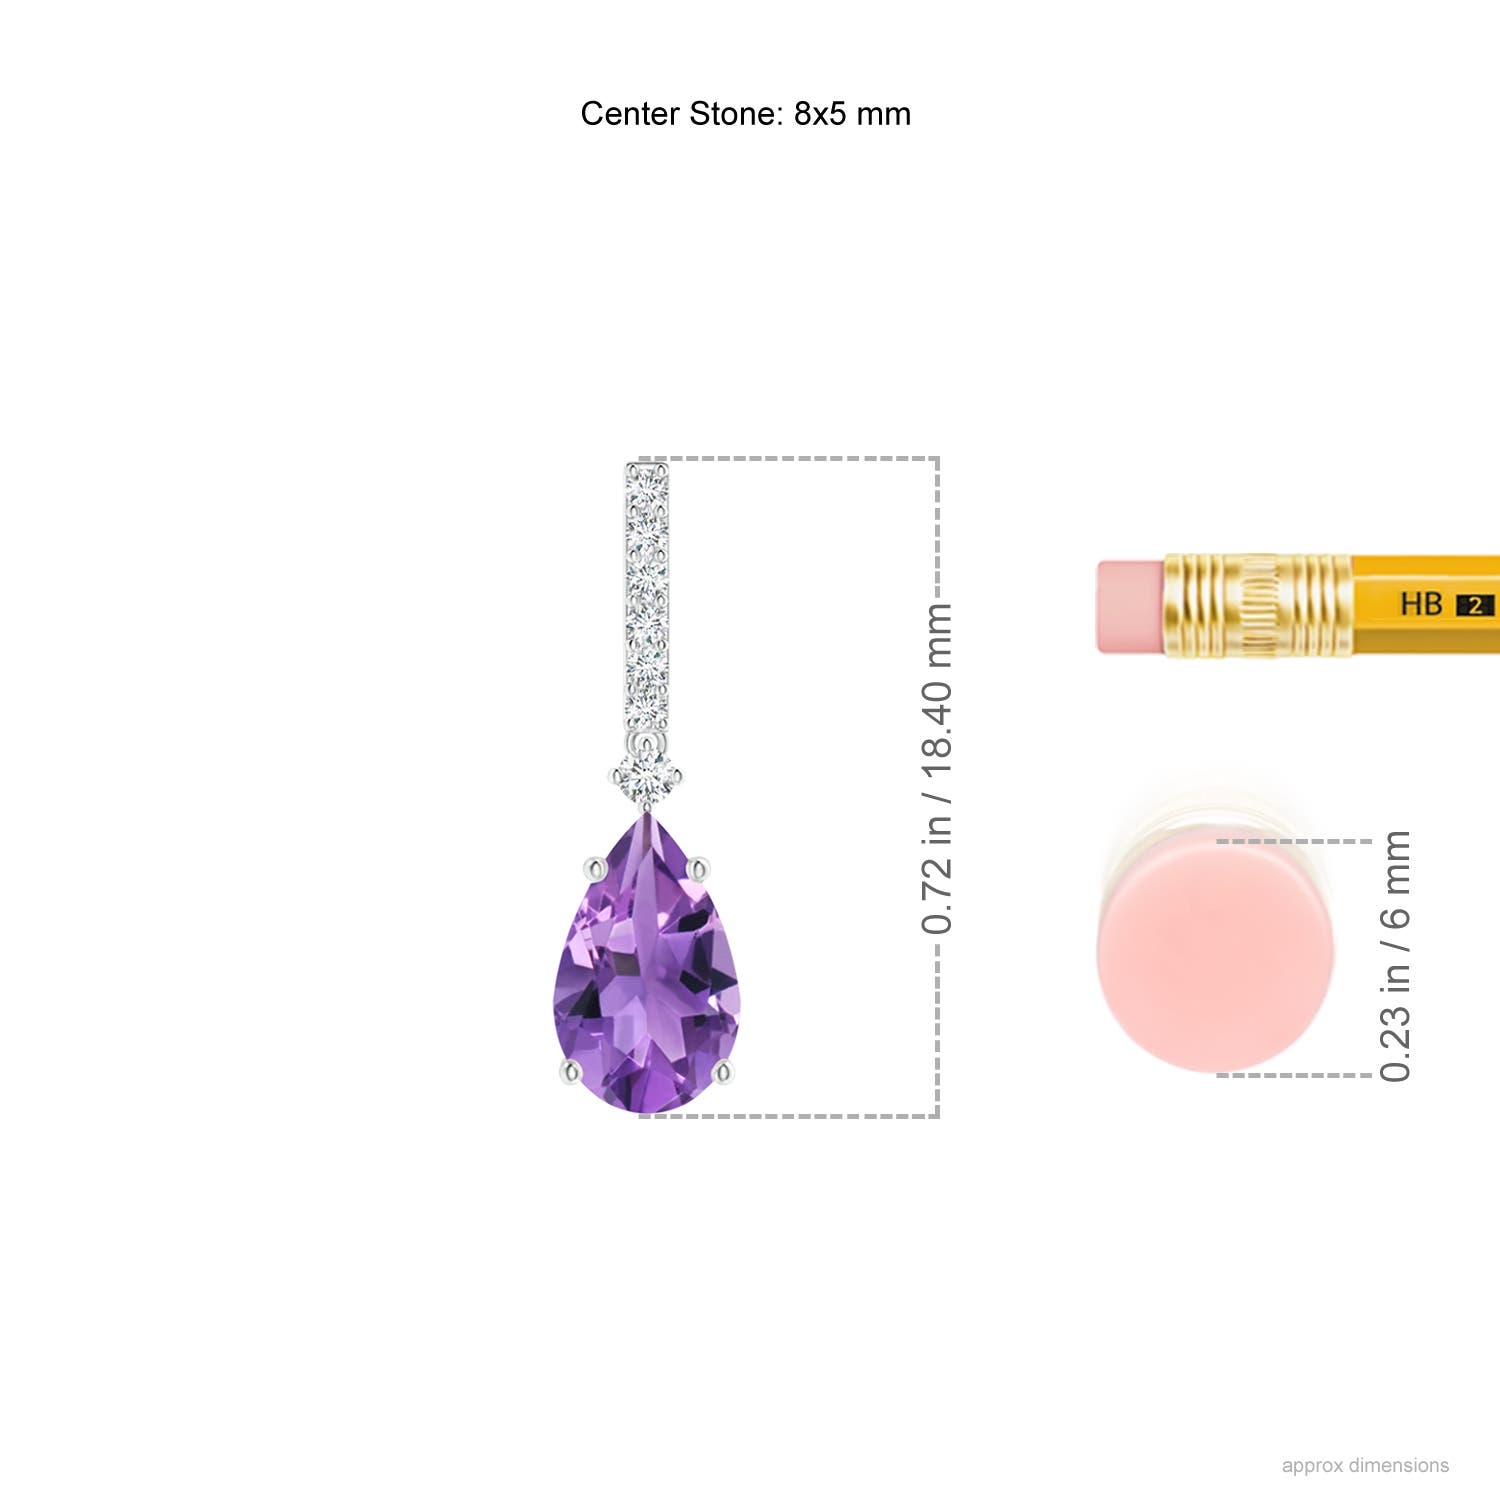 AA - Amethyst / 1.5 CT / 14 KT White Gold